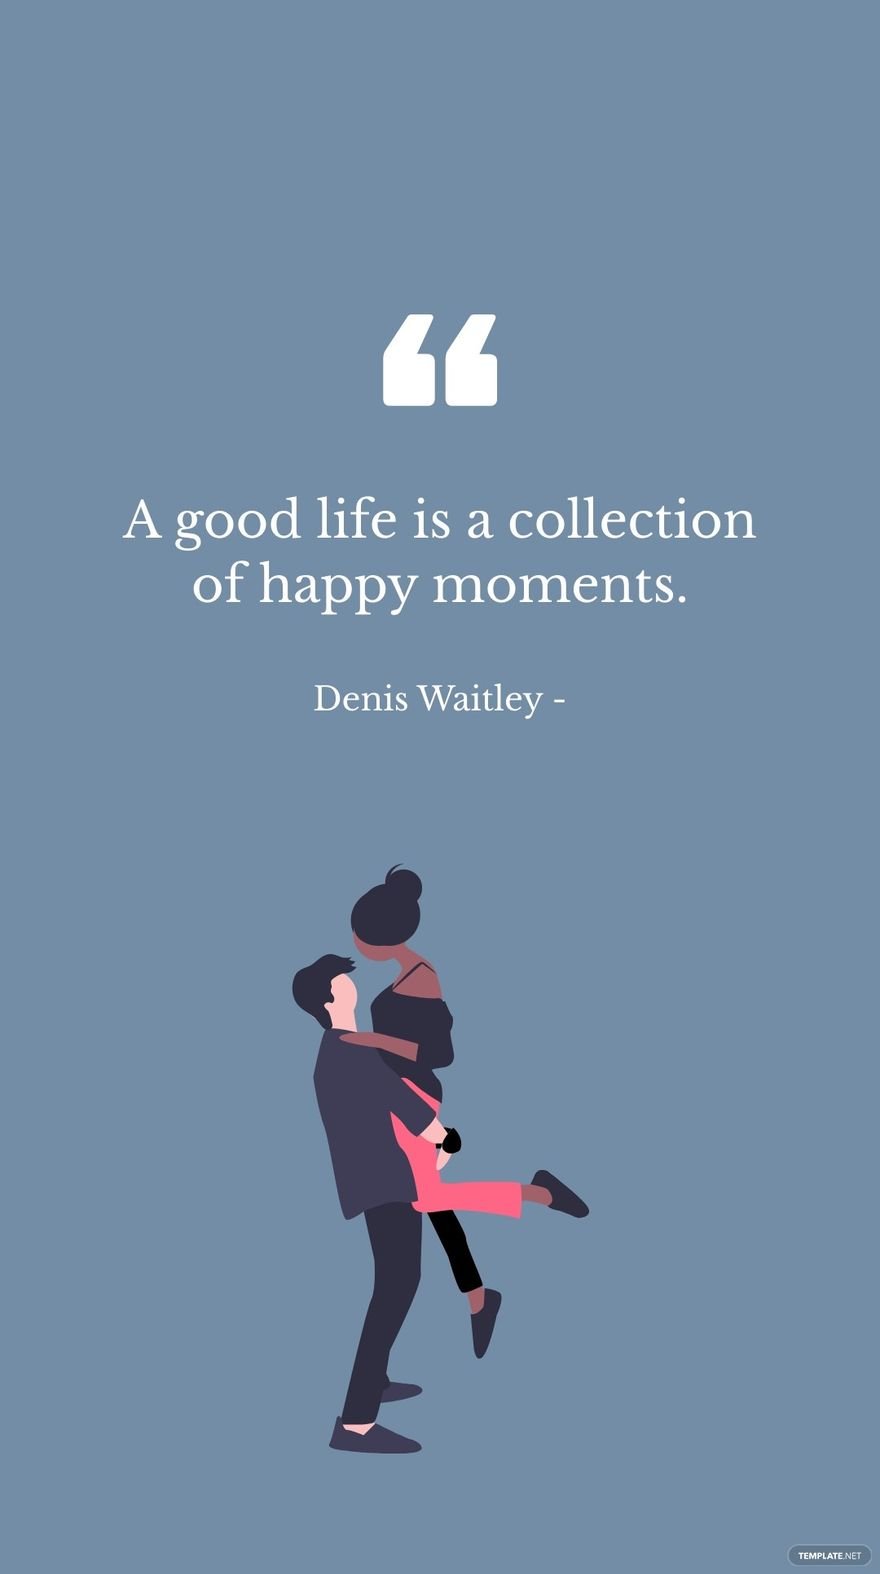 Free Denis Waitley - A good life is a collection of happy moments. in JPG